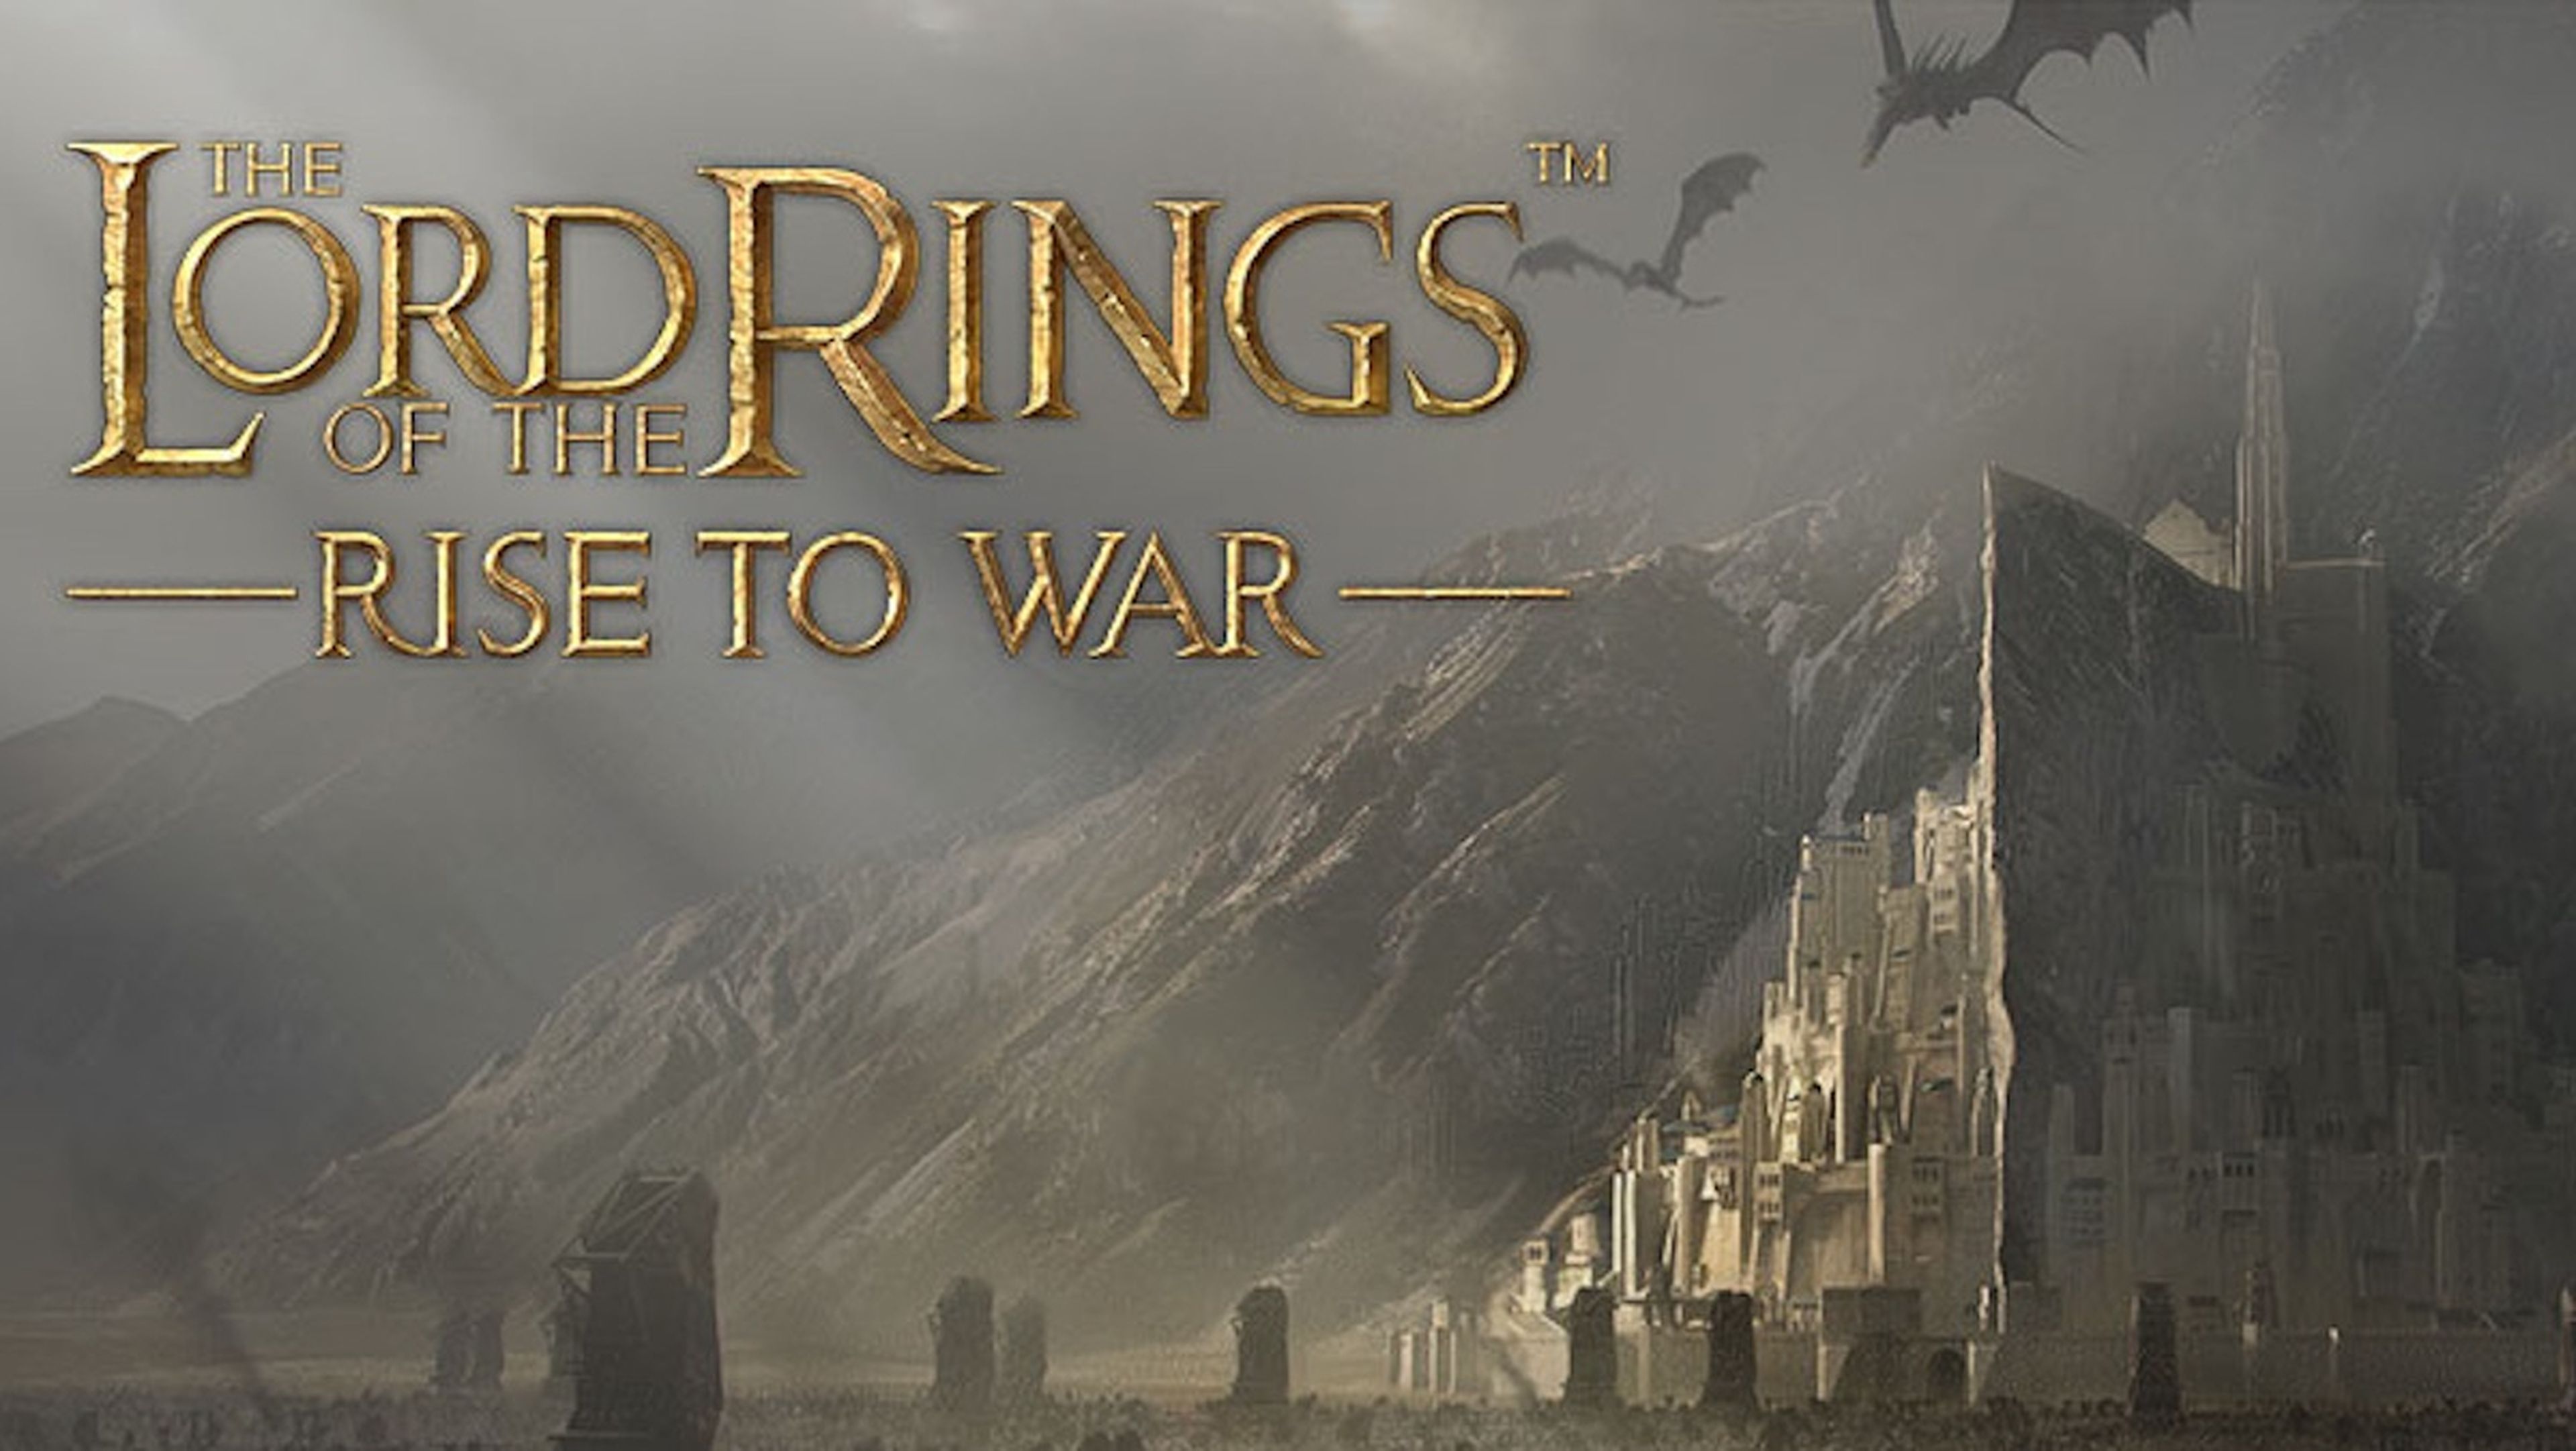 Lord of the rings rise to war